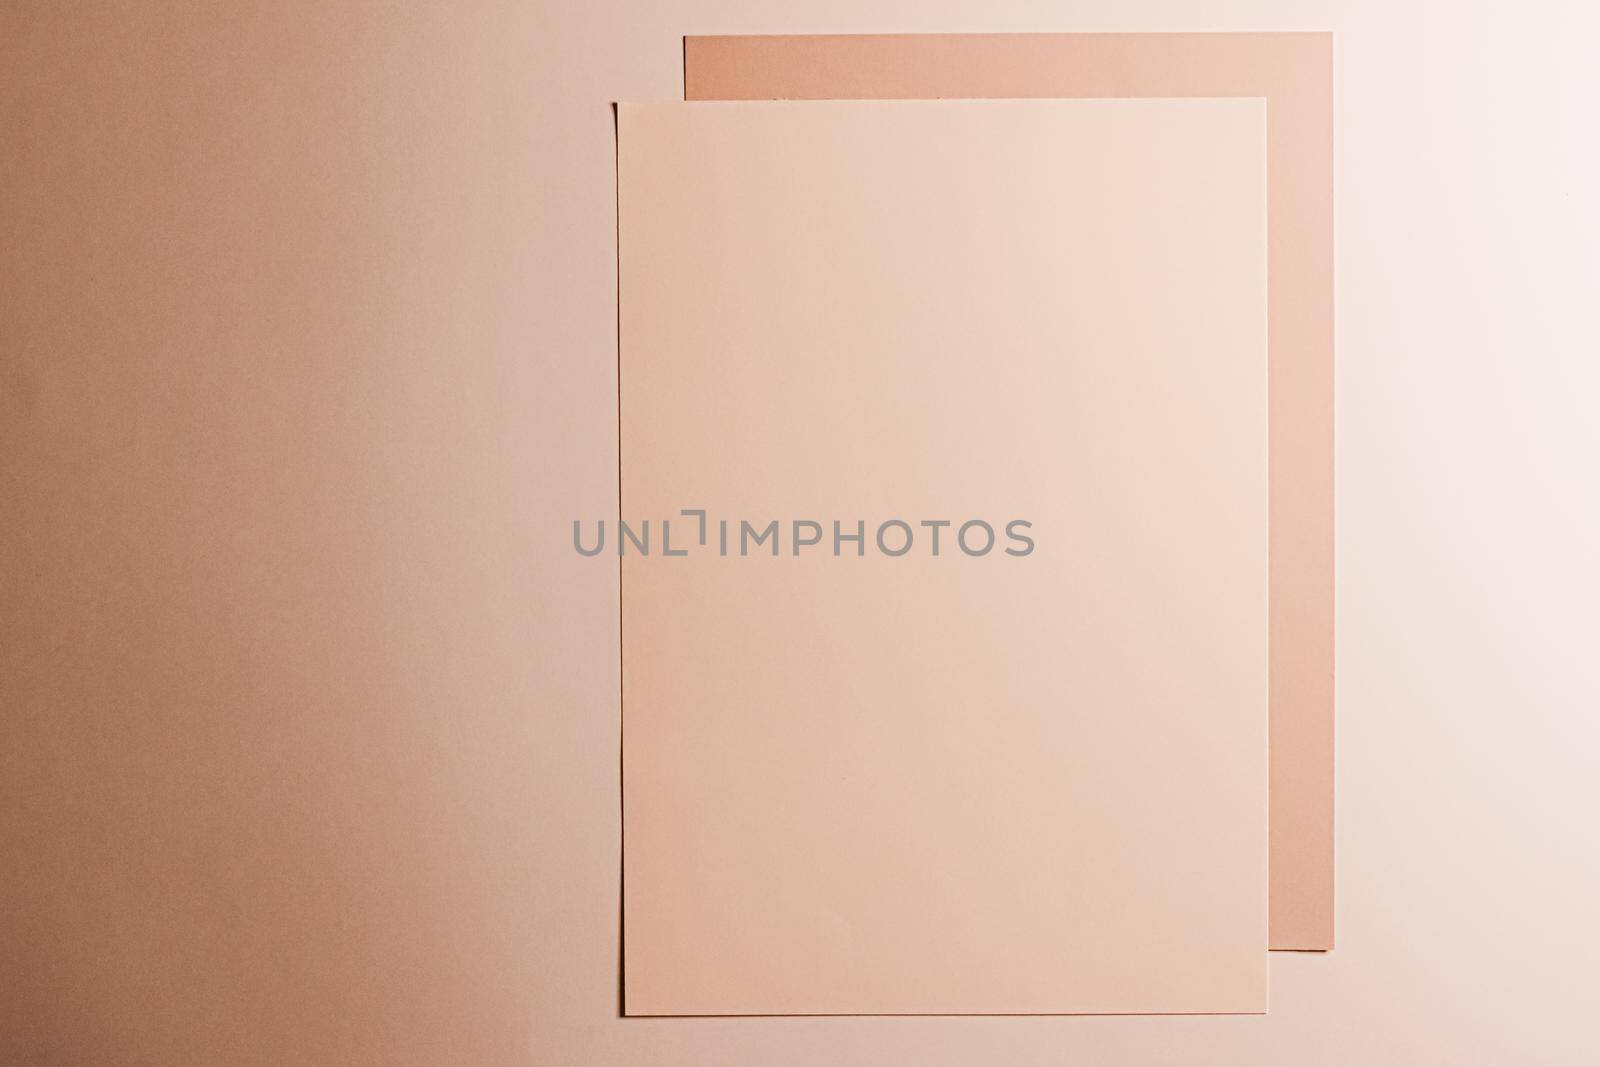 Beige A4 papers as office stationery flatlay, luxury branding flat lay and brand identity design for mockups